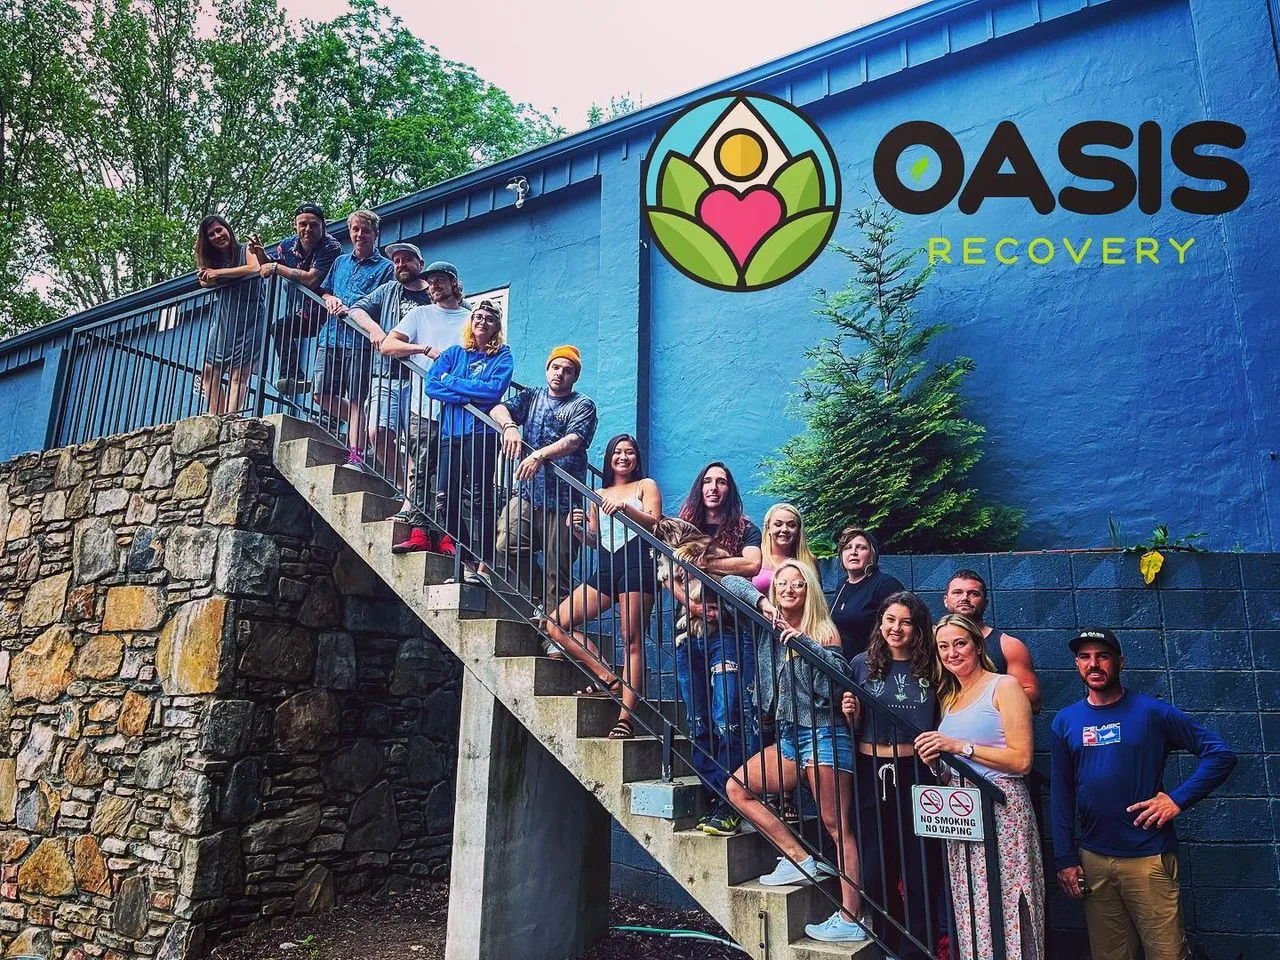 Oasis recovery center staff in front of the center